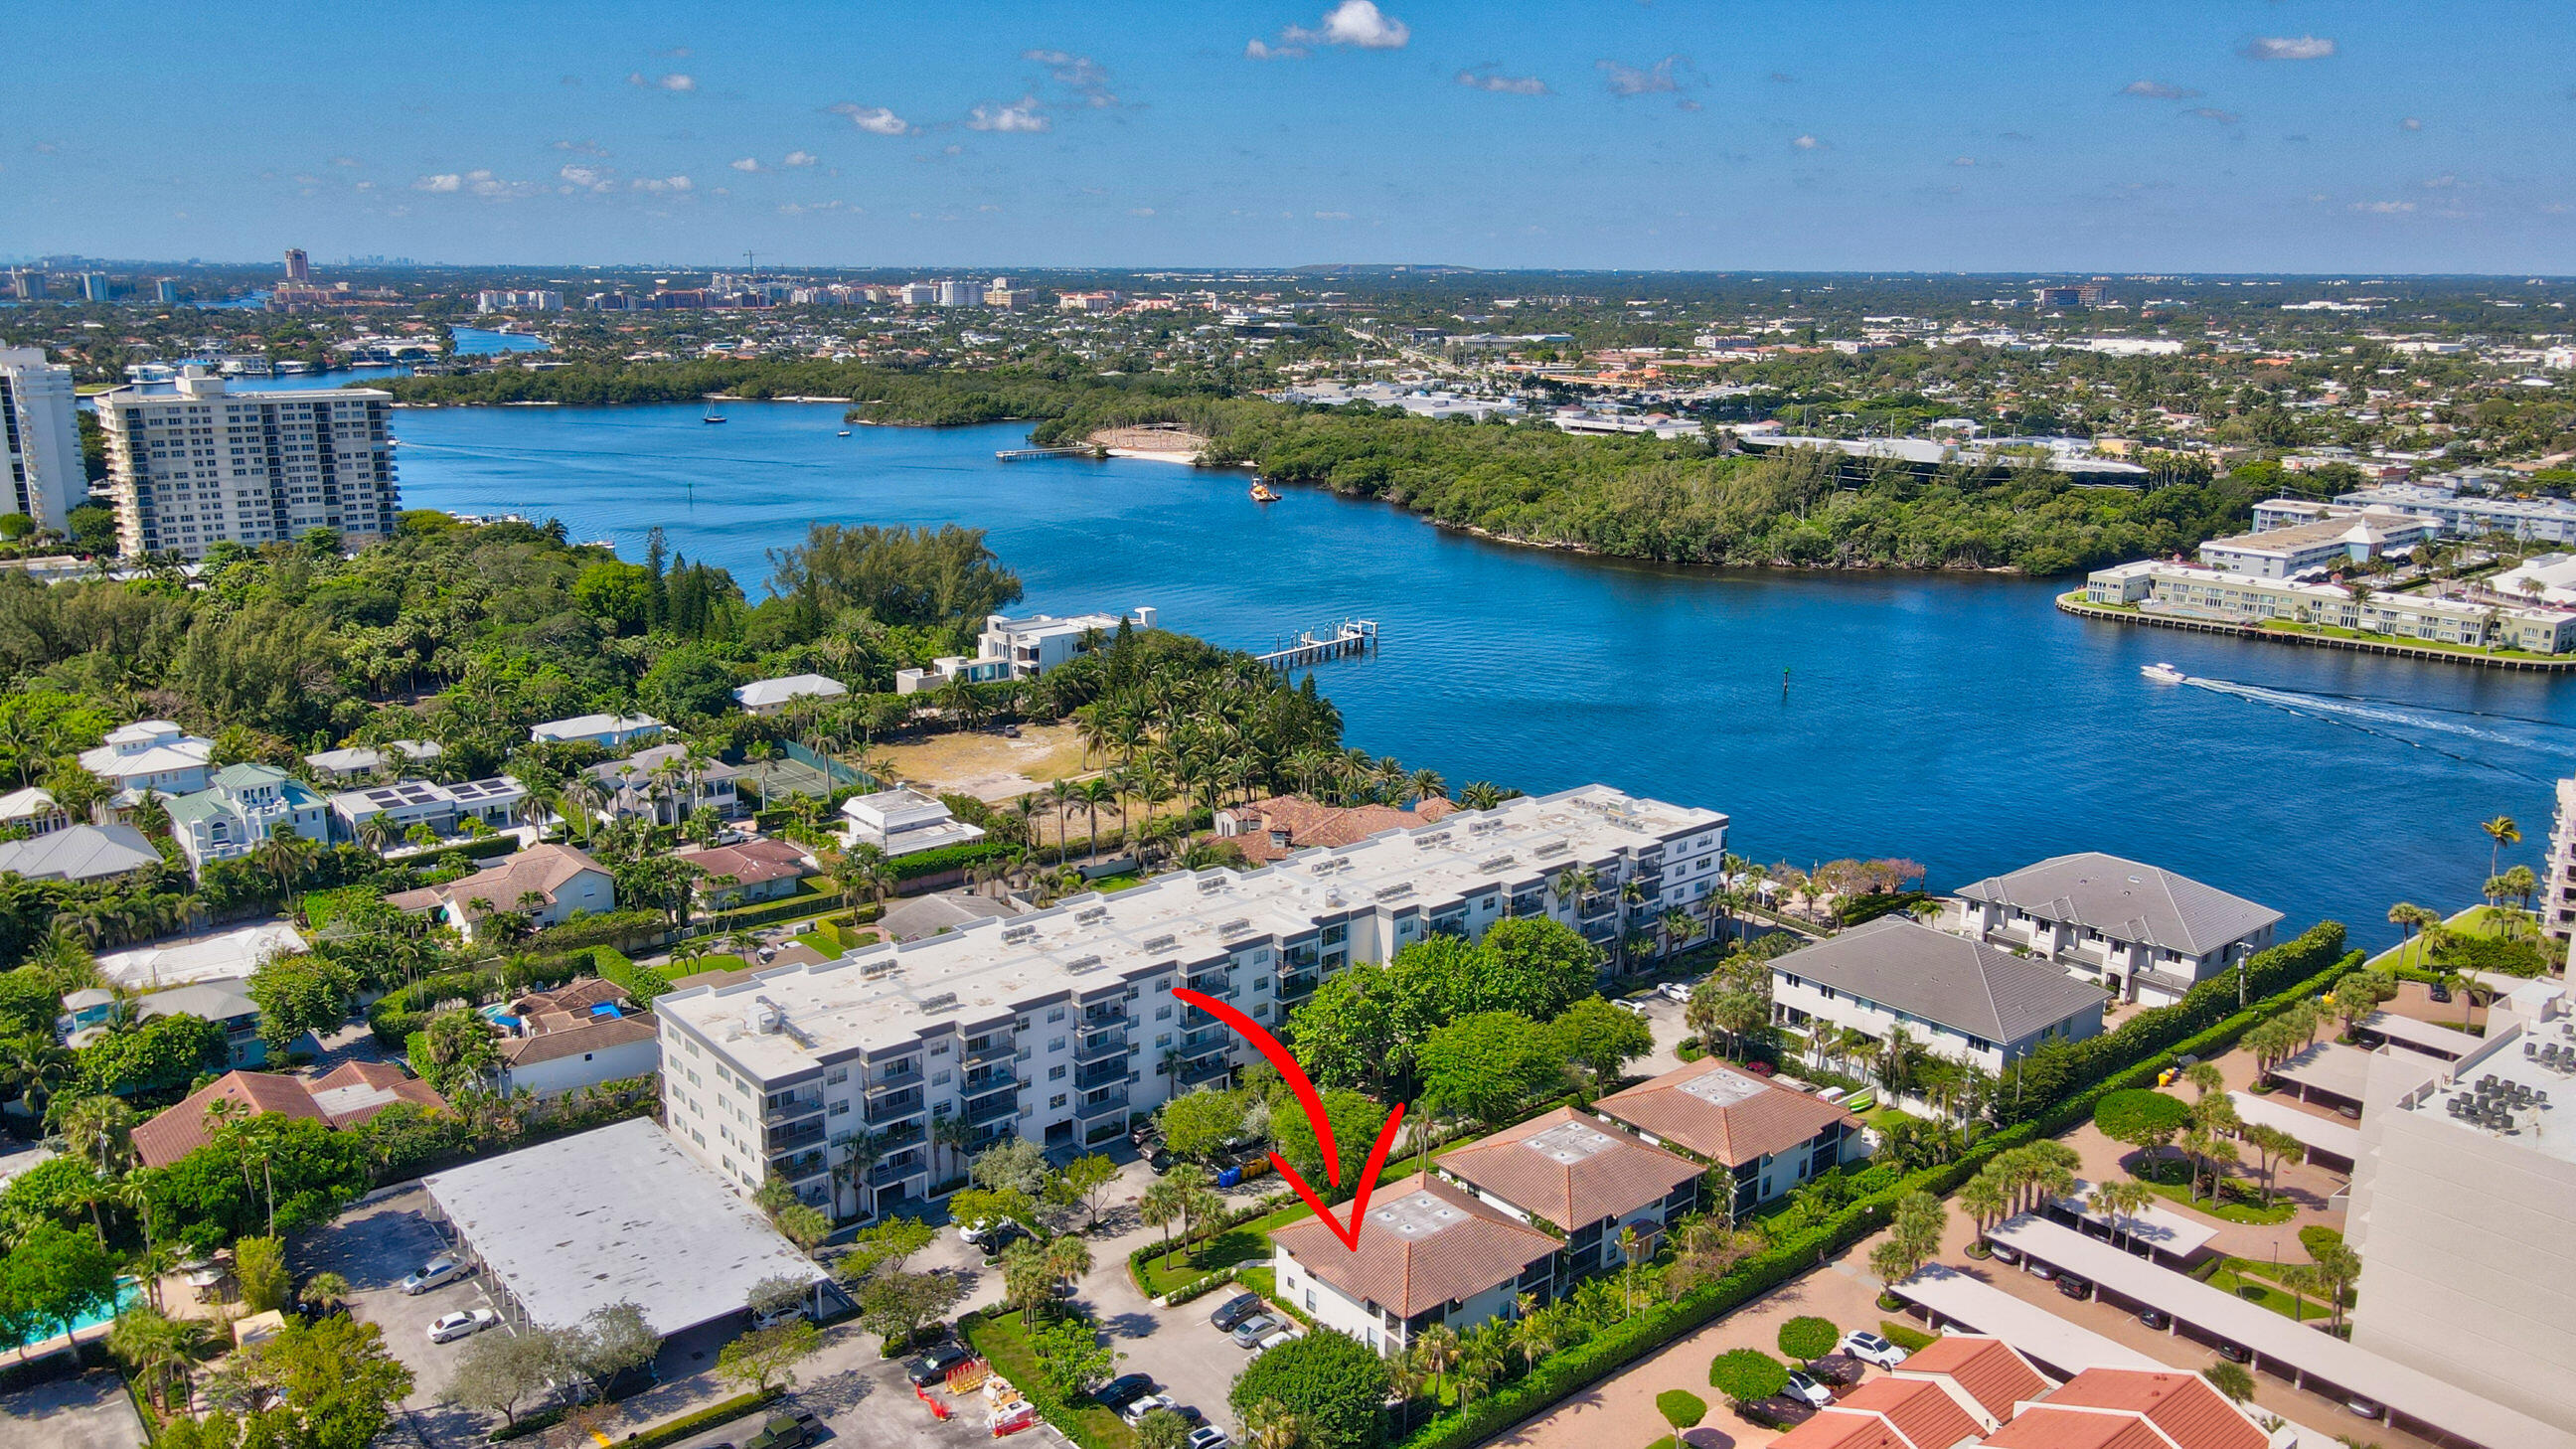 941 Sweetwater Lane, Unit #206, Boca Raton, Florida, 33431, United States, 2 Bedrooms Bedrooms, ,2 BathroomsBathrooms,Residential,For Sale,941 Sweetwater Lane, Unit #206,1511979